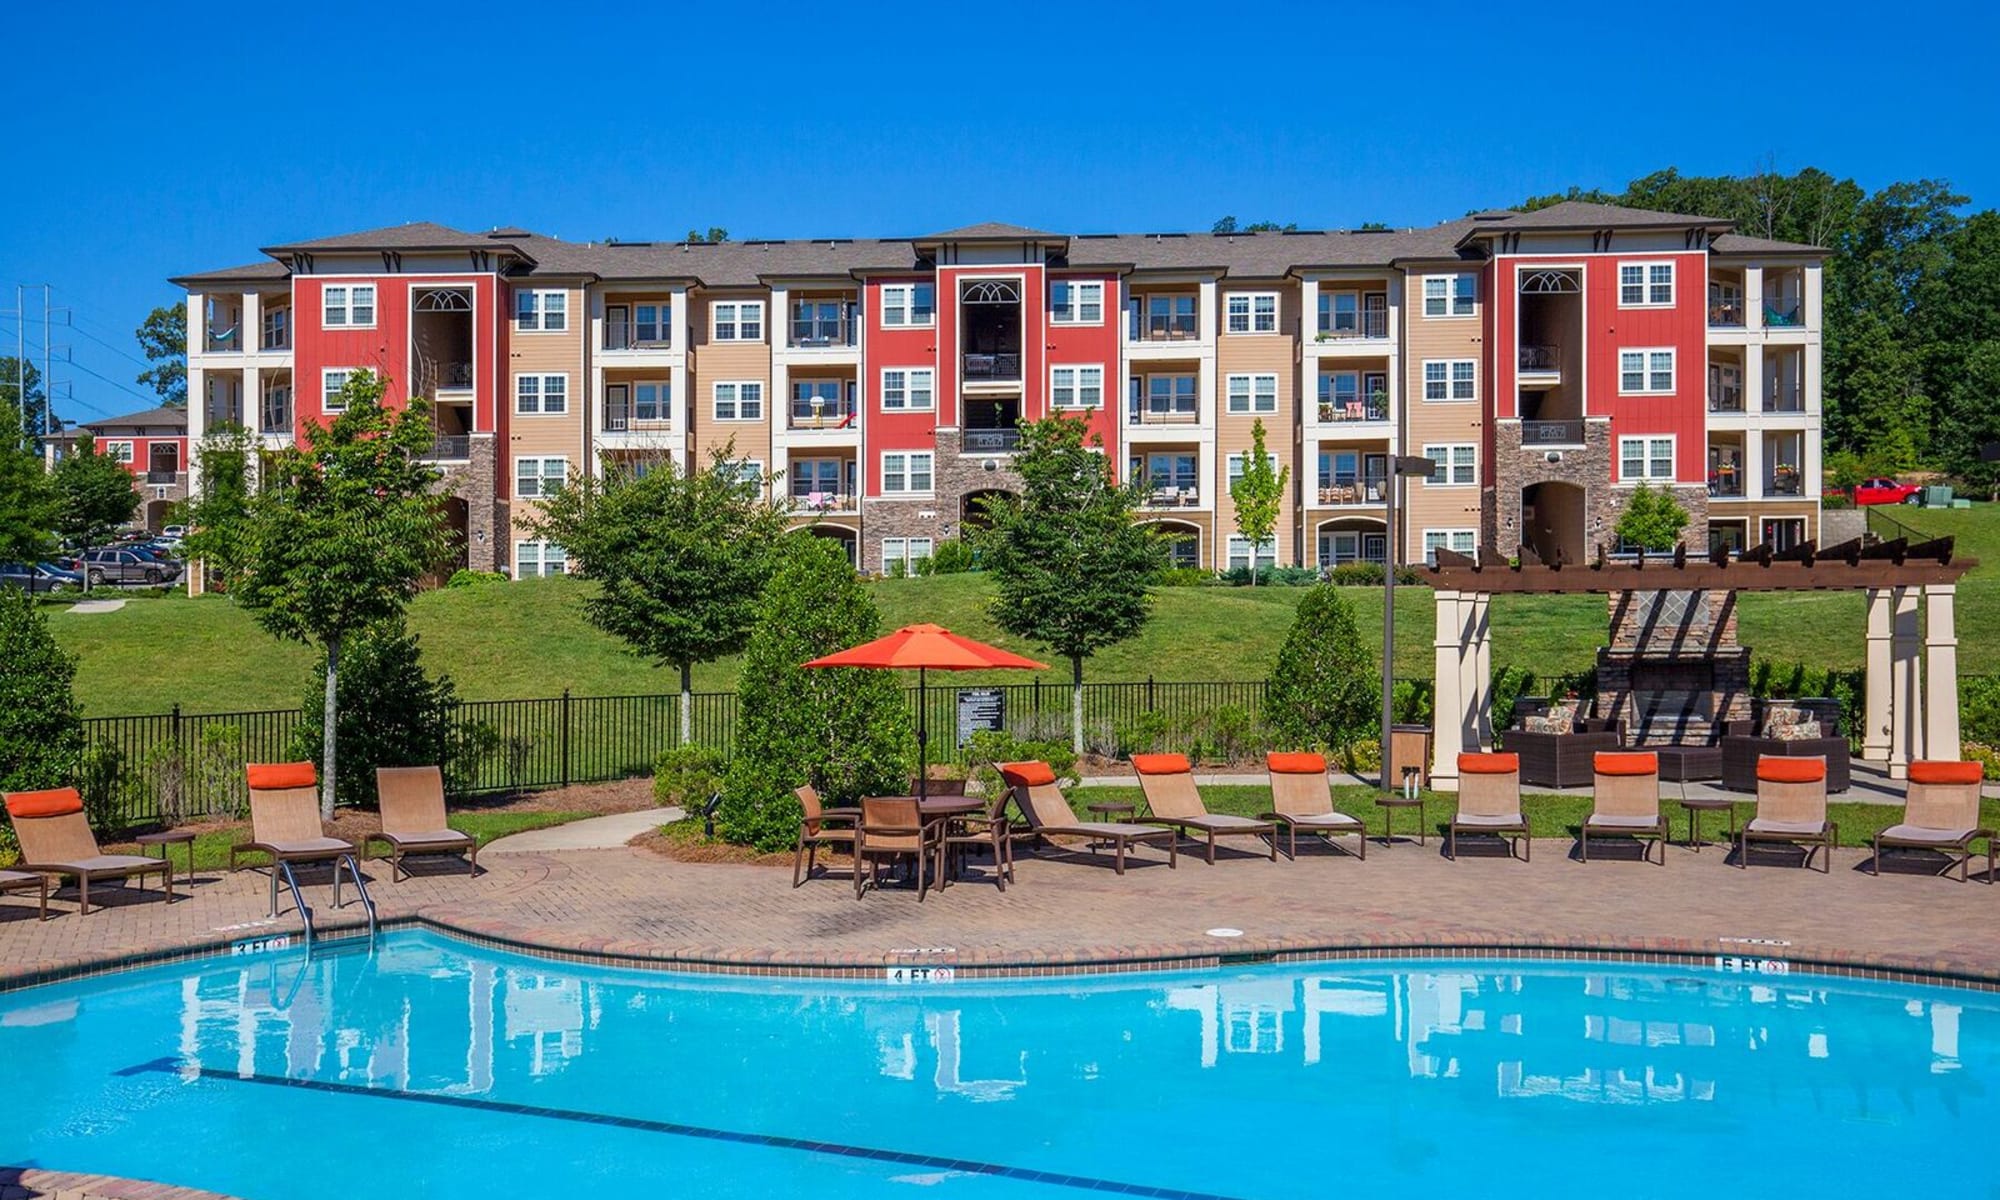 Apartments at Hills Parc in Ooltewah, Tennessee